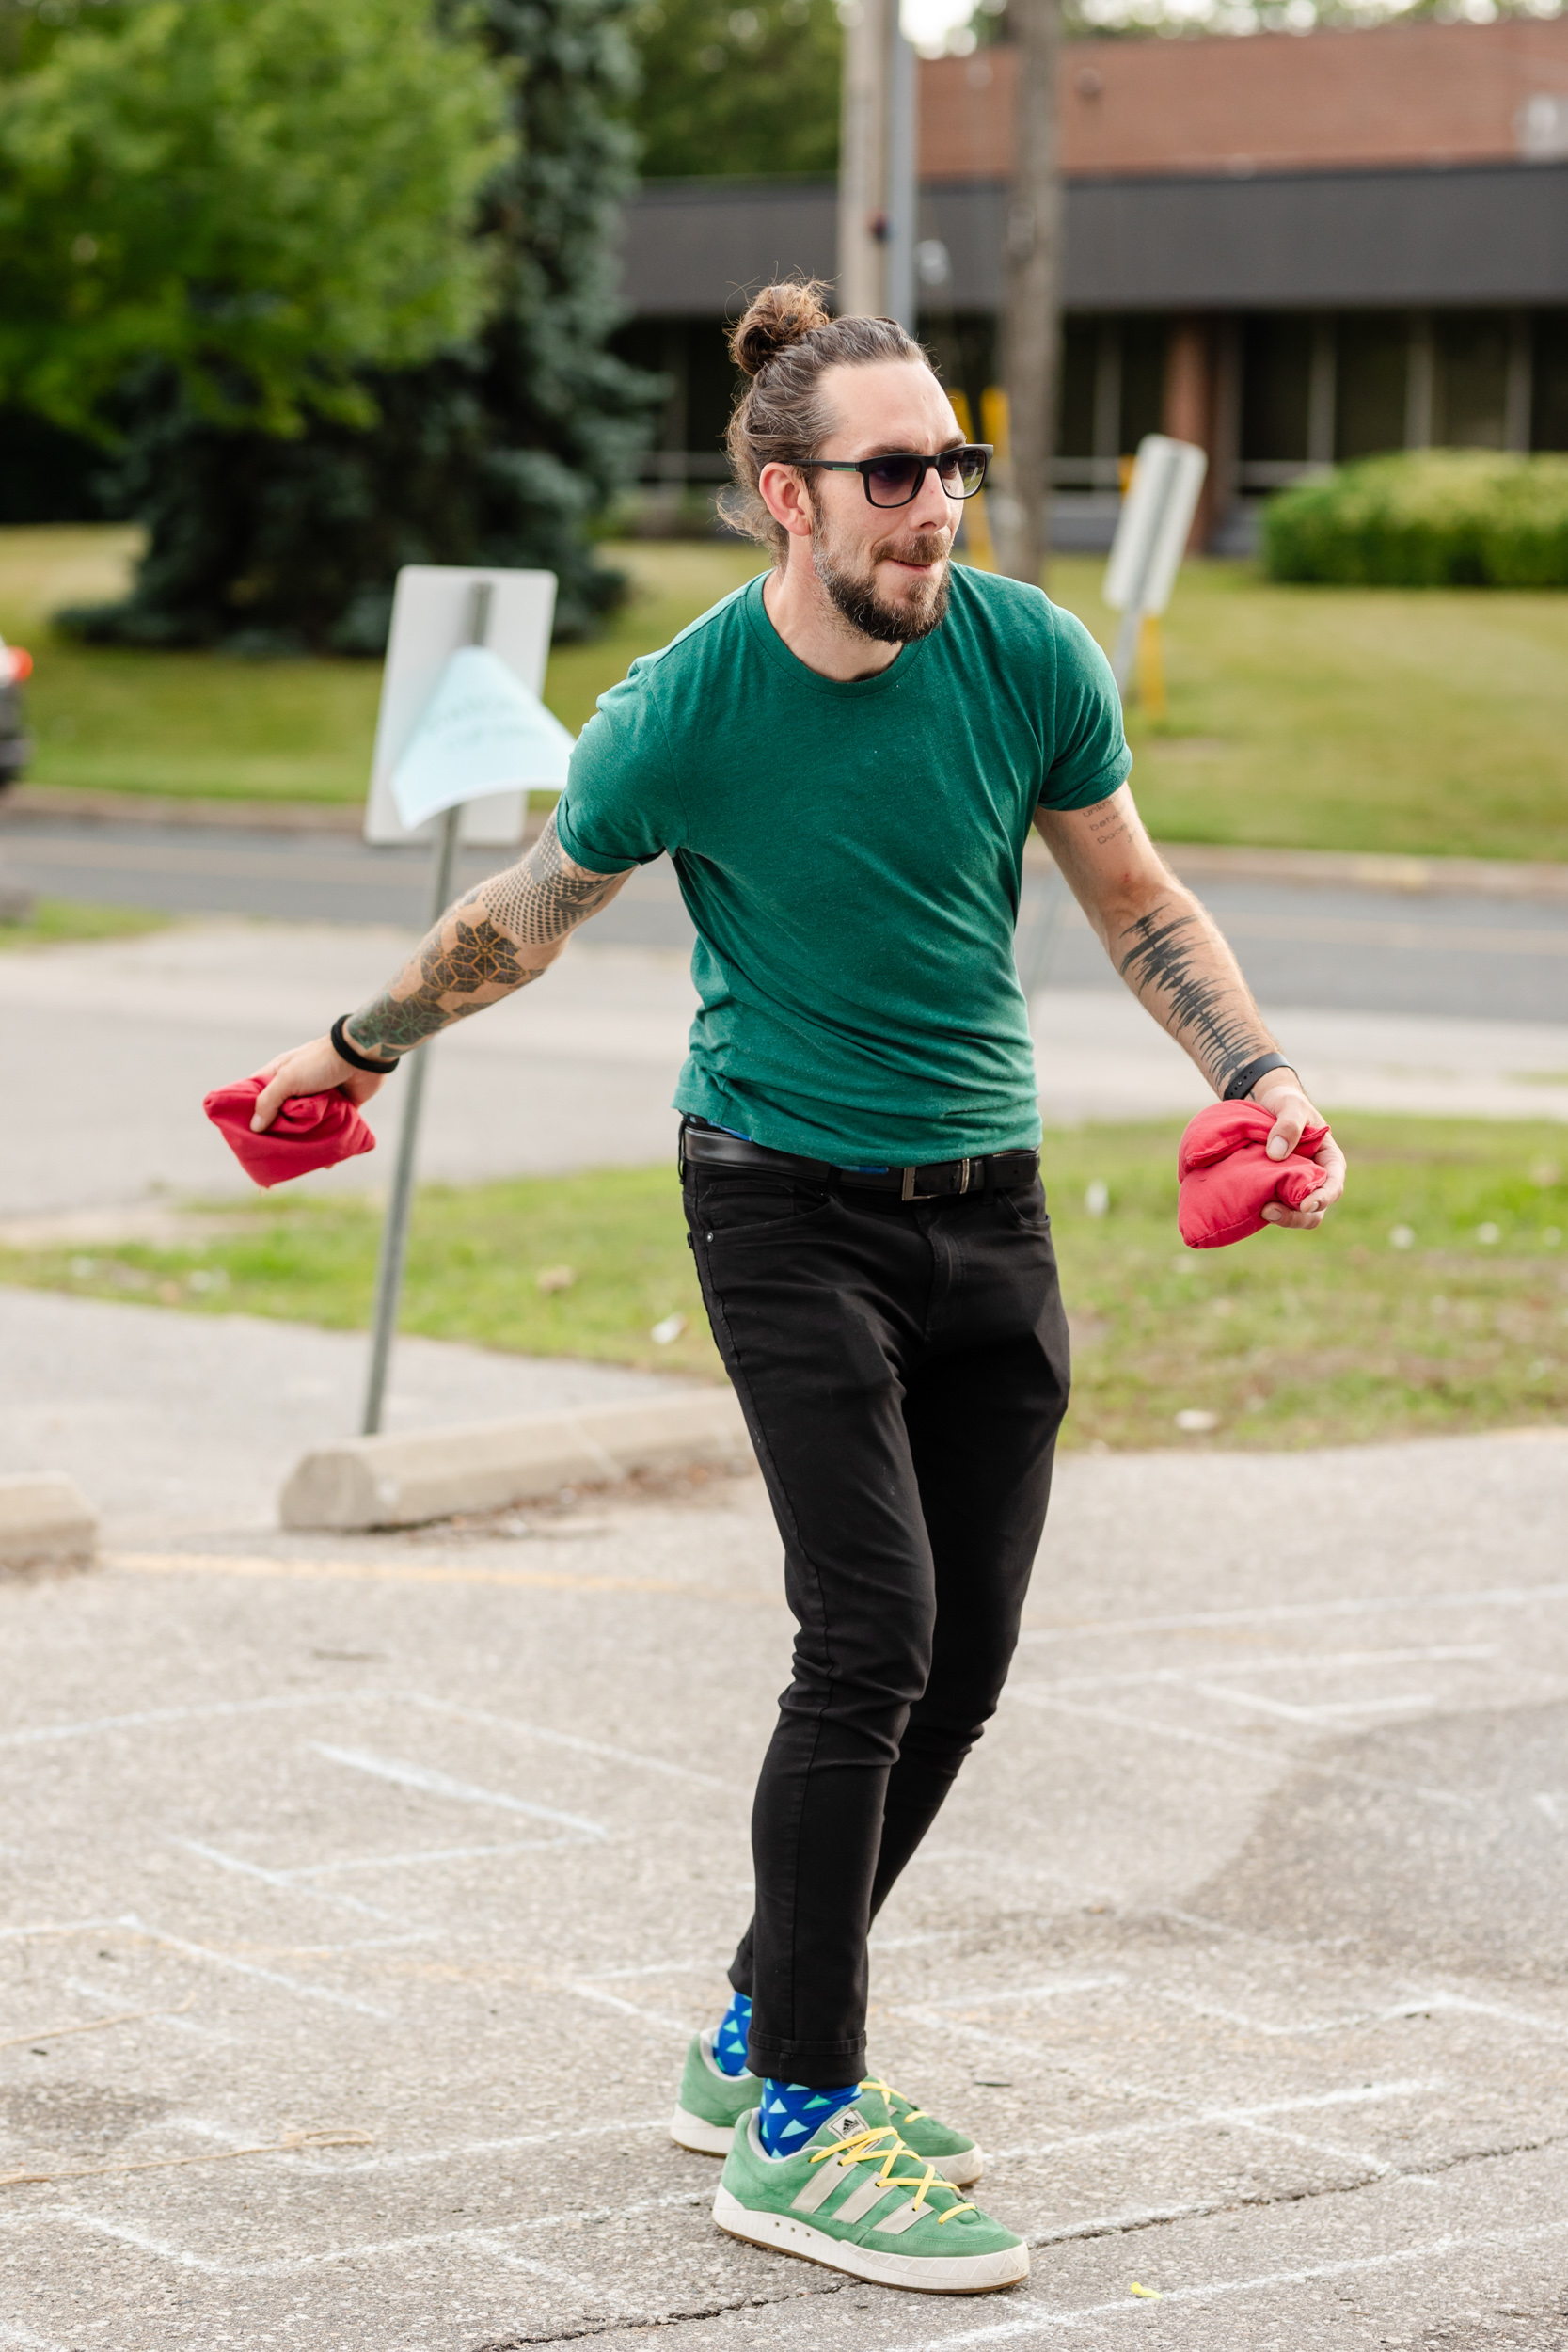 A man is engaging in a social frisbee game.